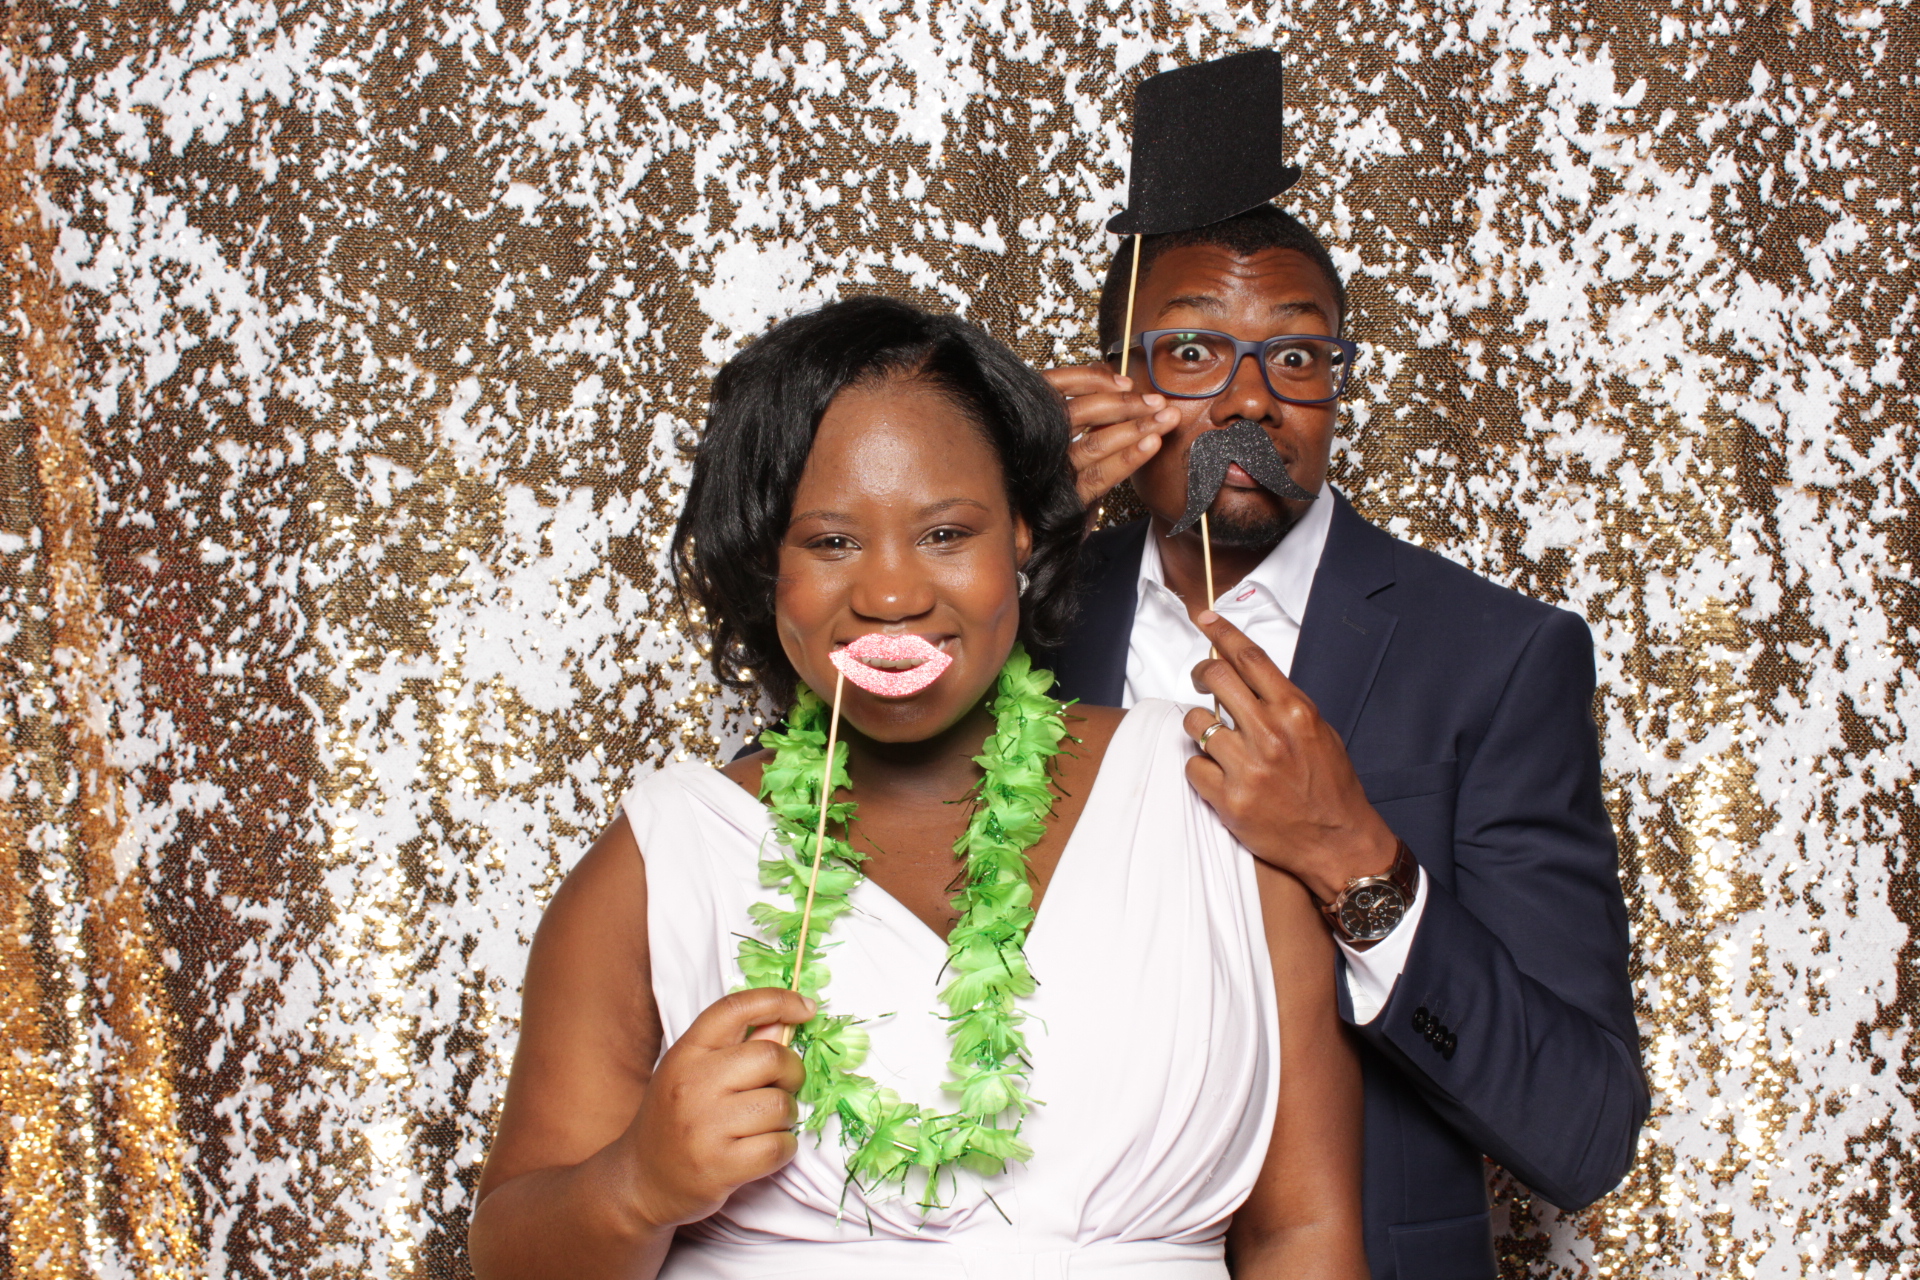 corporate event photo booth